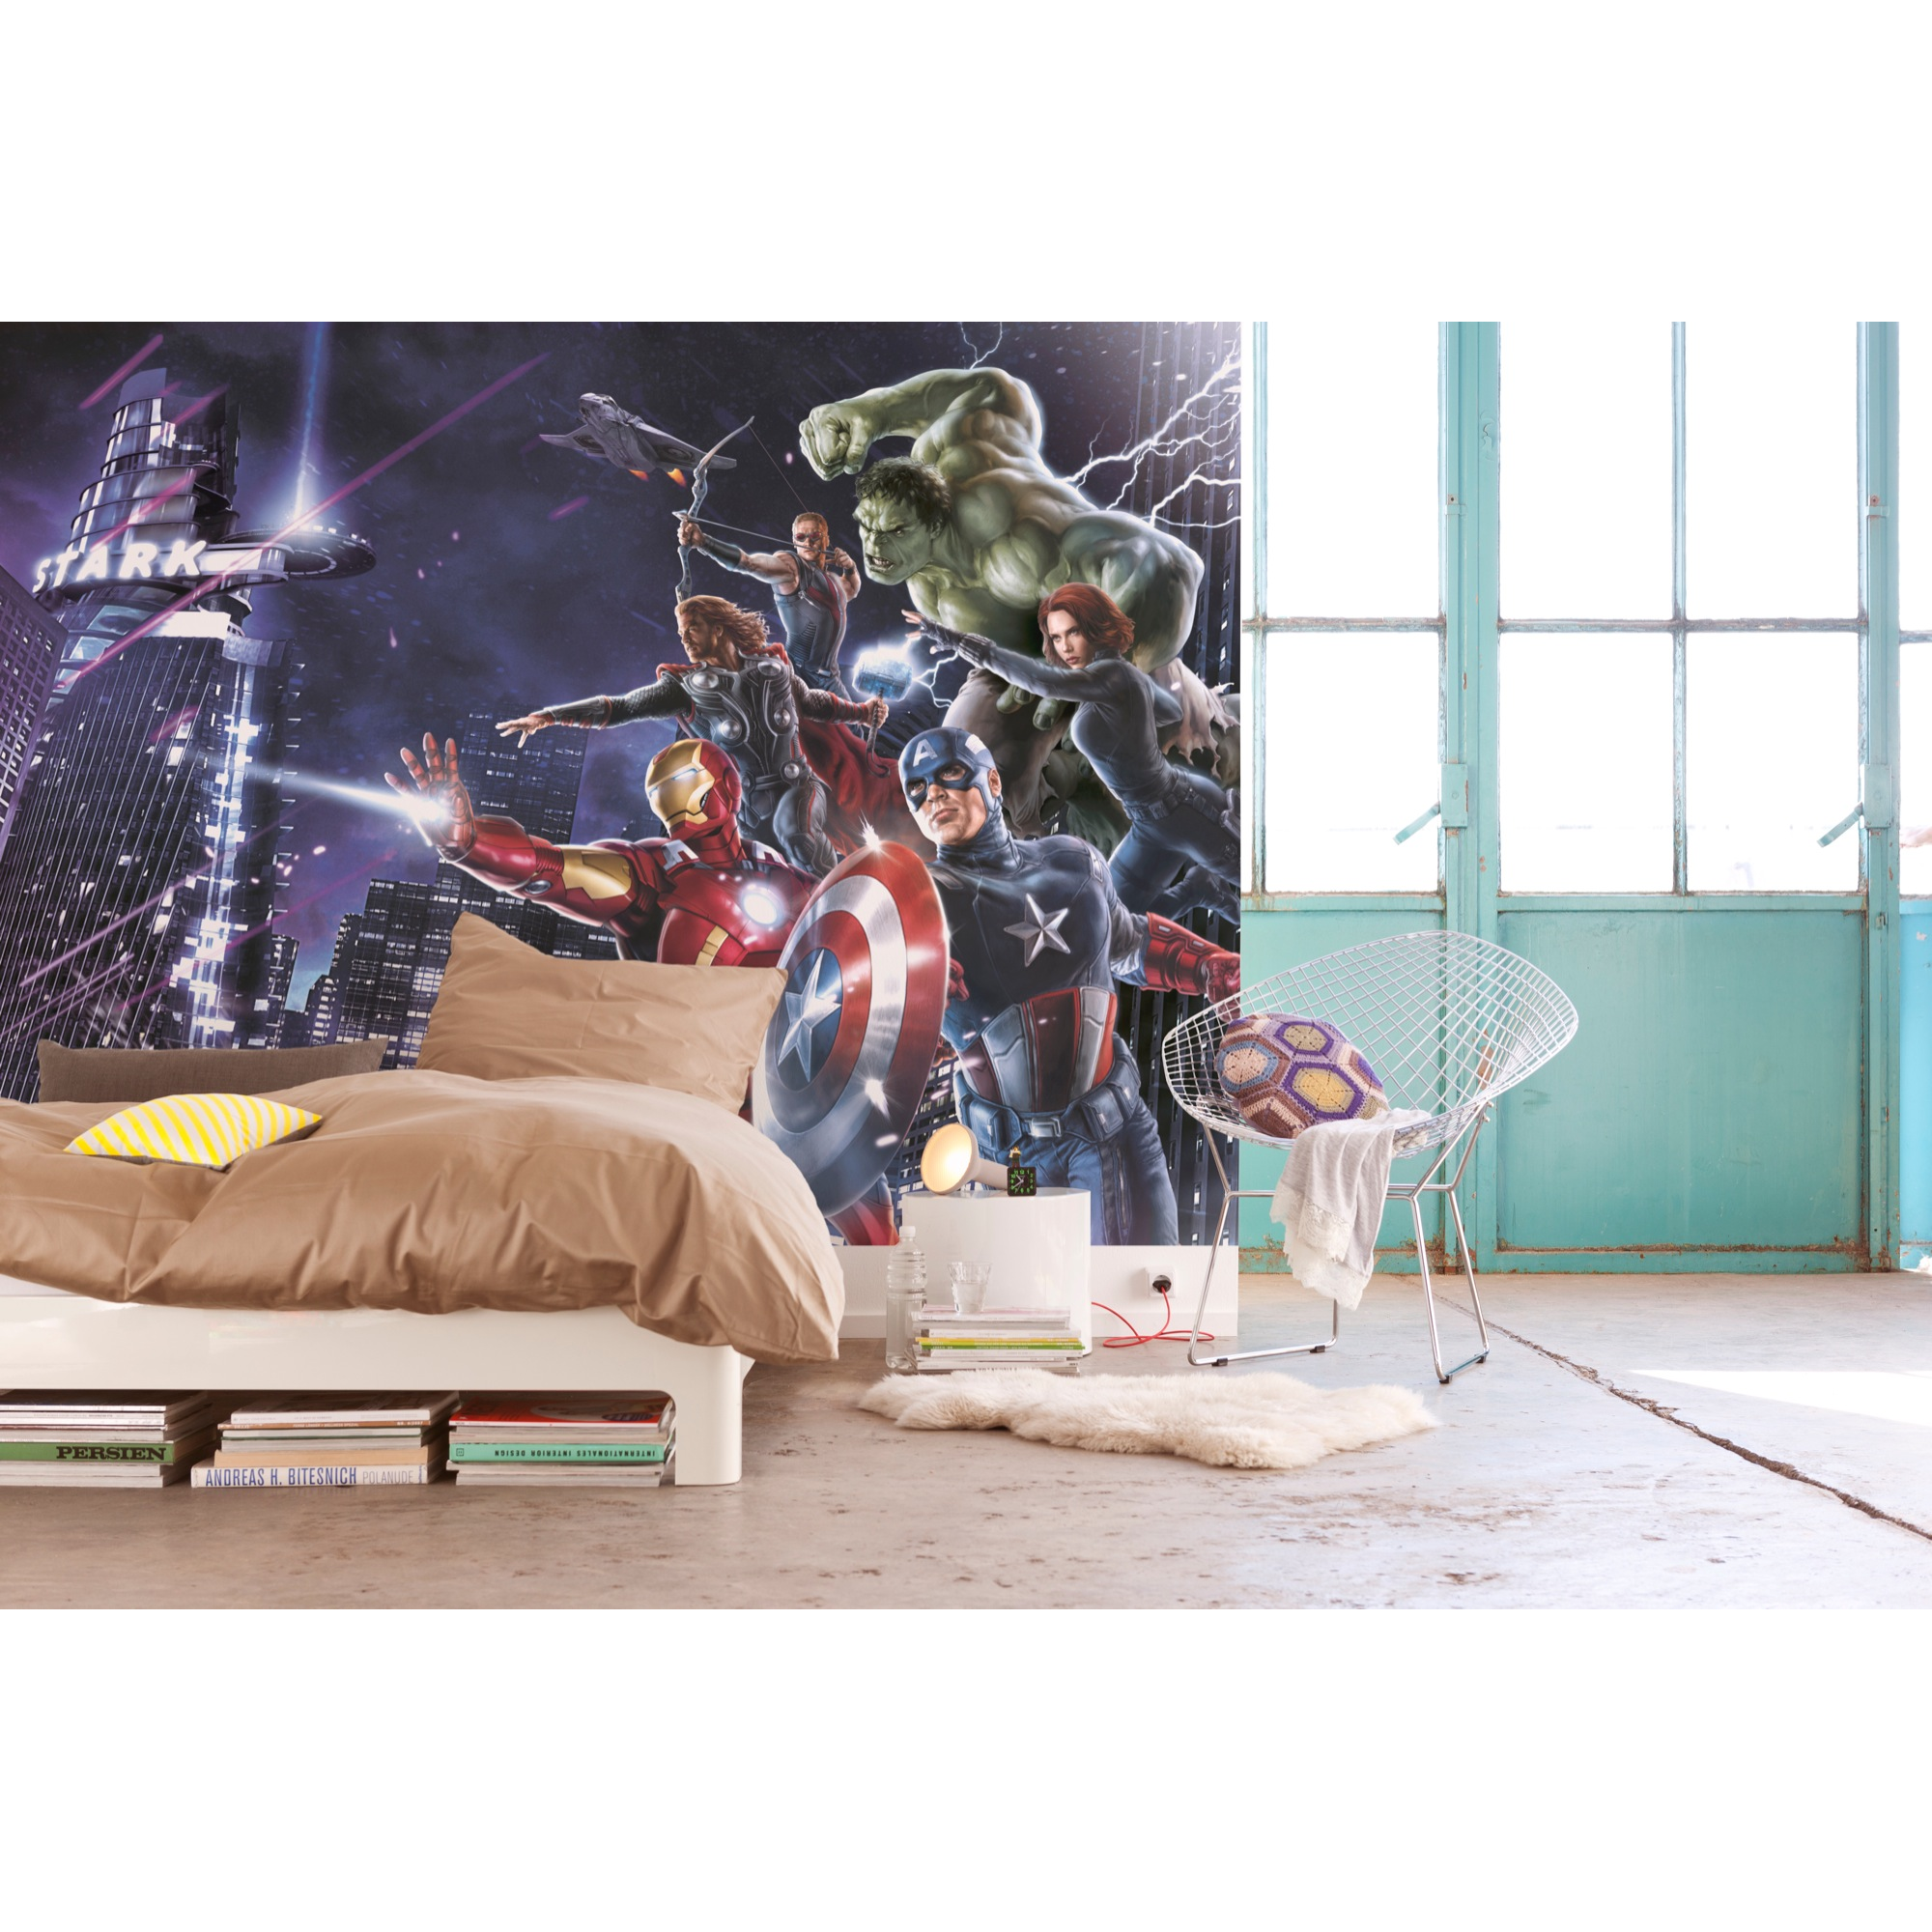 Fototapete 'Avengers Citynight' 254 x 184 cm + product picture